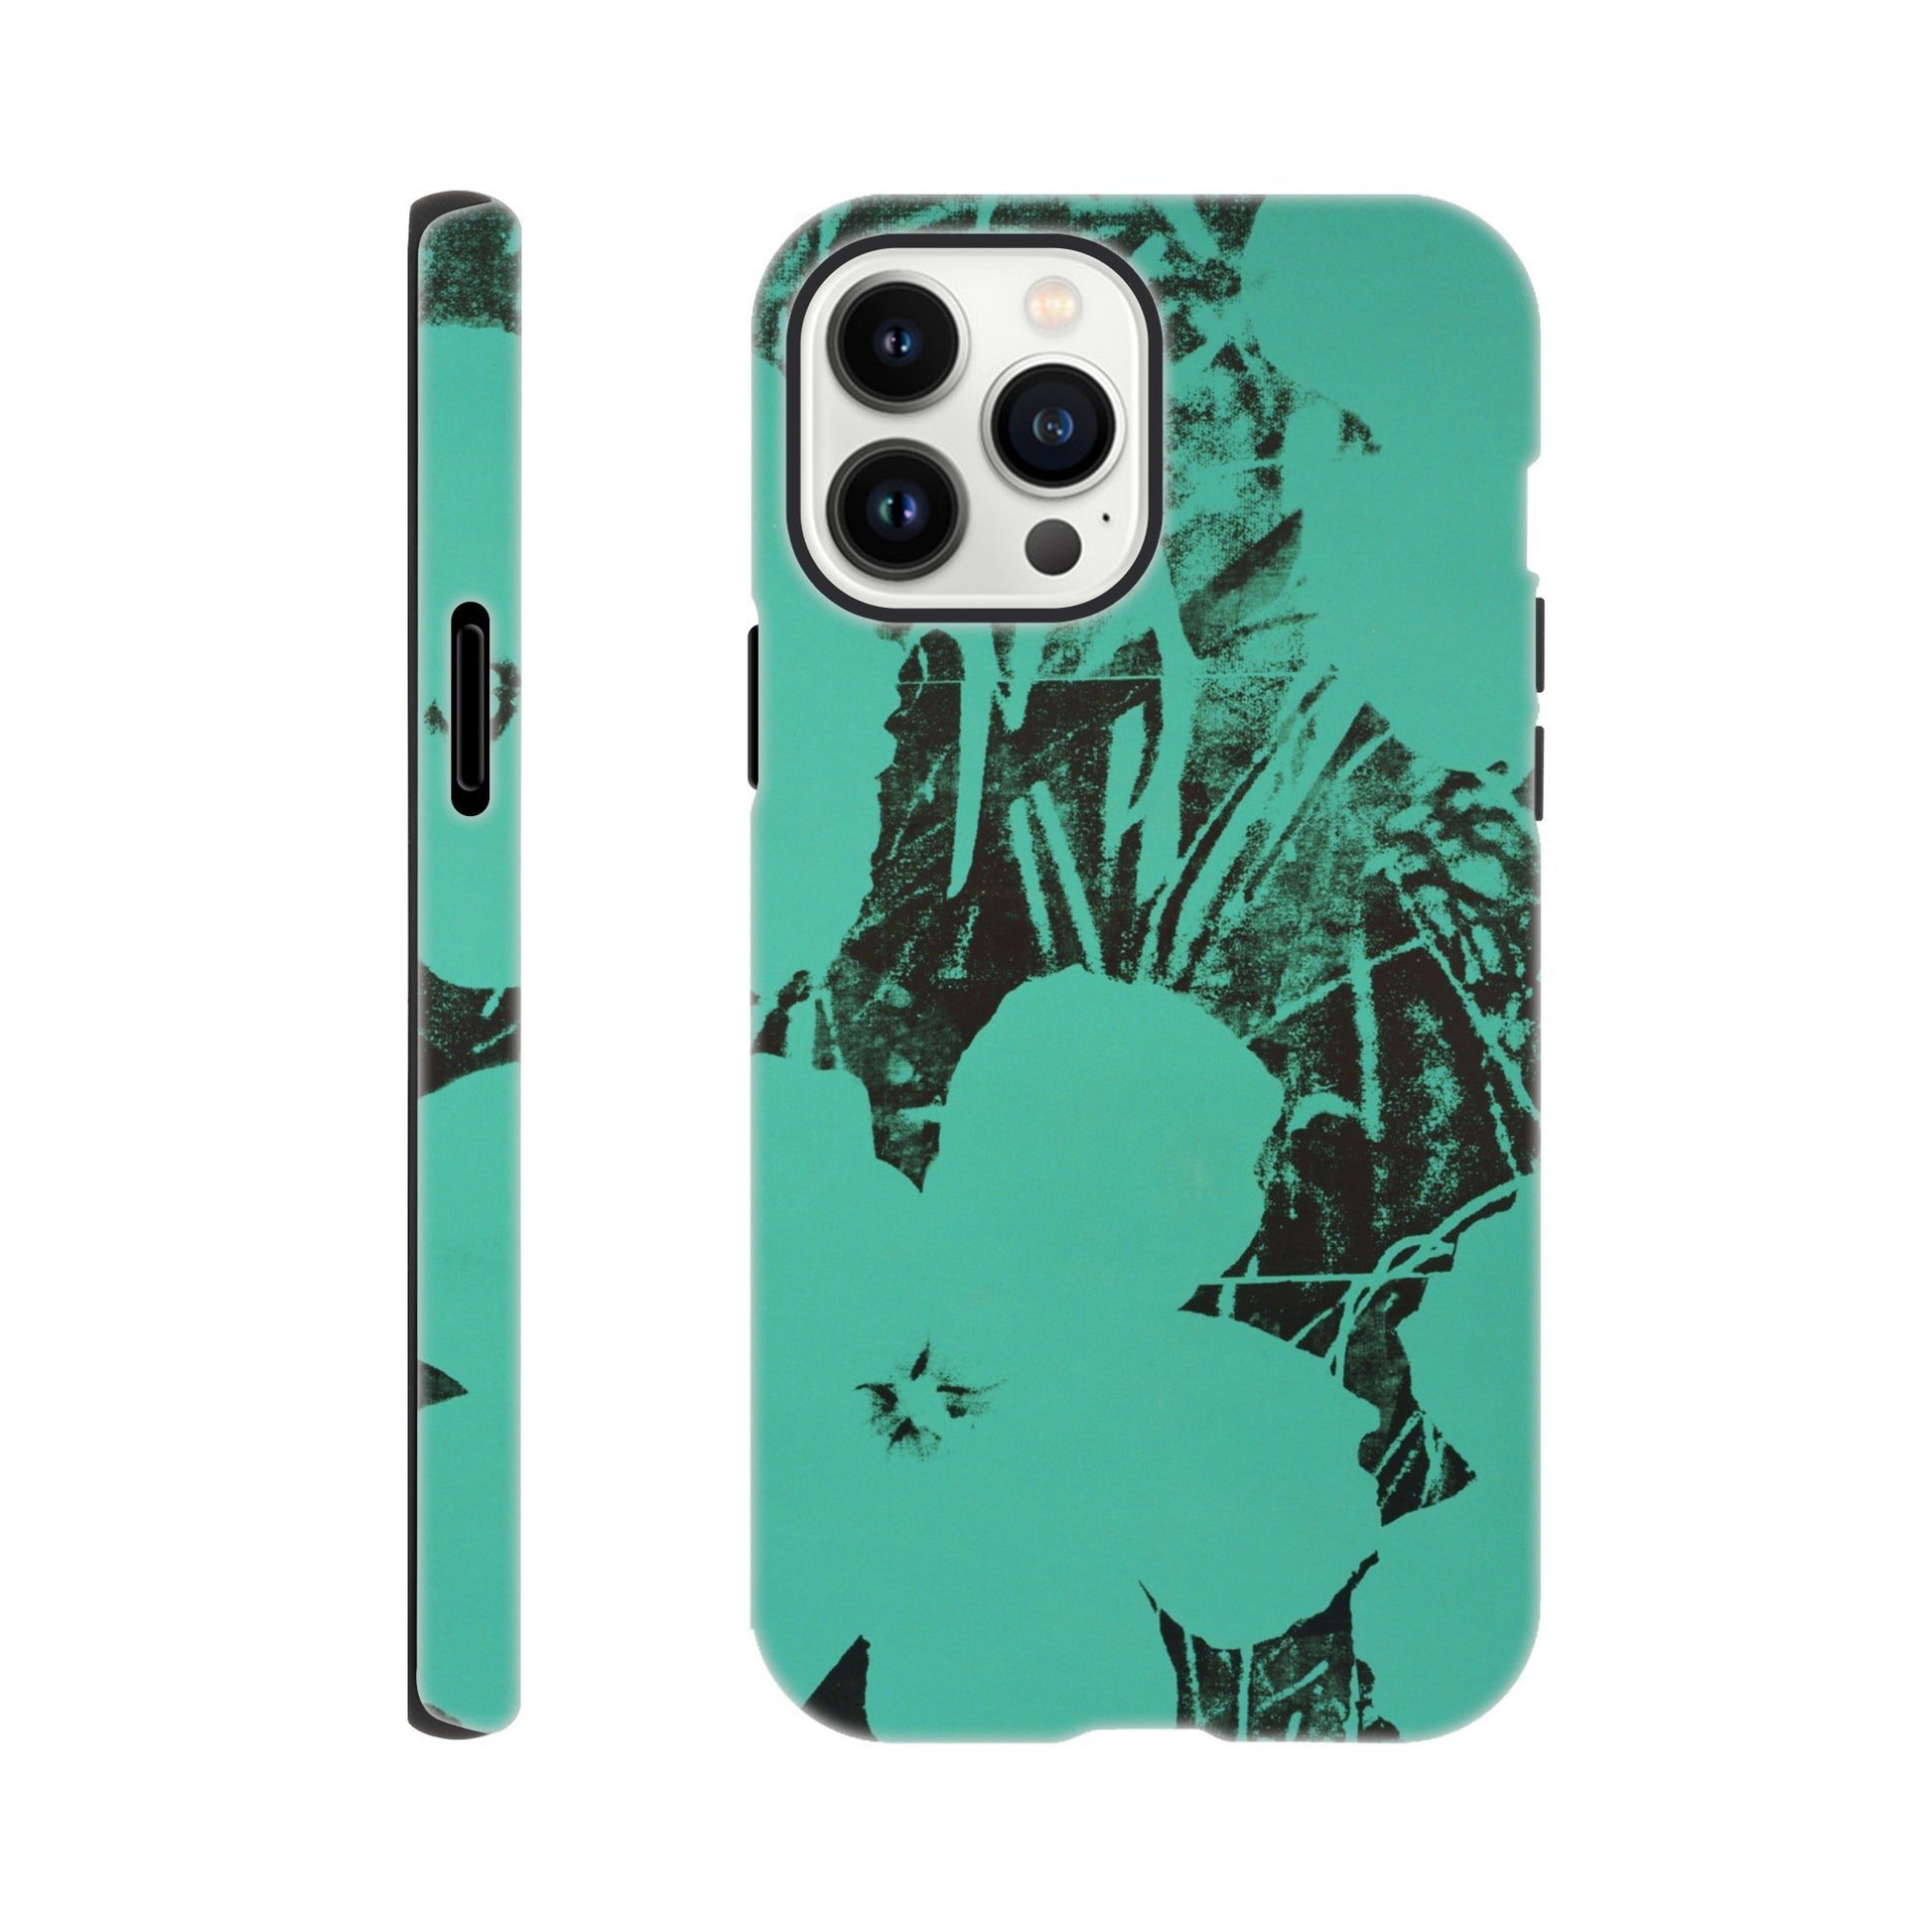 ANDY WARHOL - TEN-FOOT FLOWERS - TOUGH iPHONE PHONE CASE